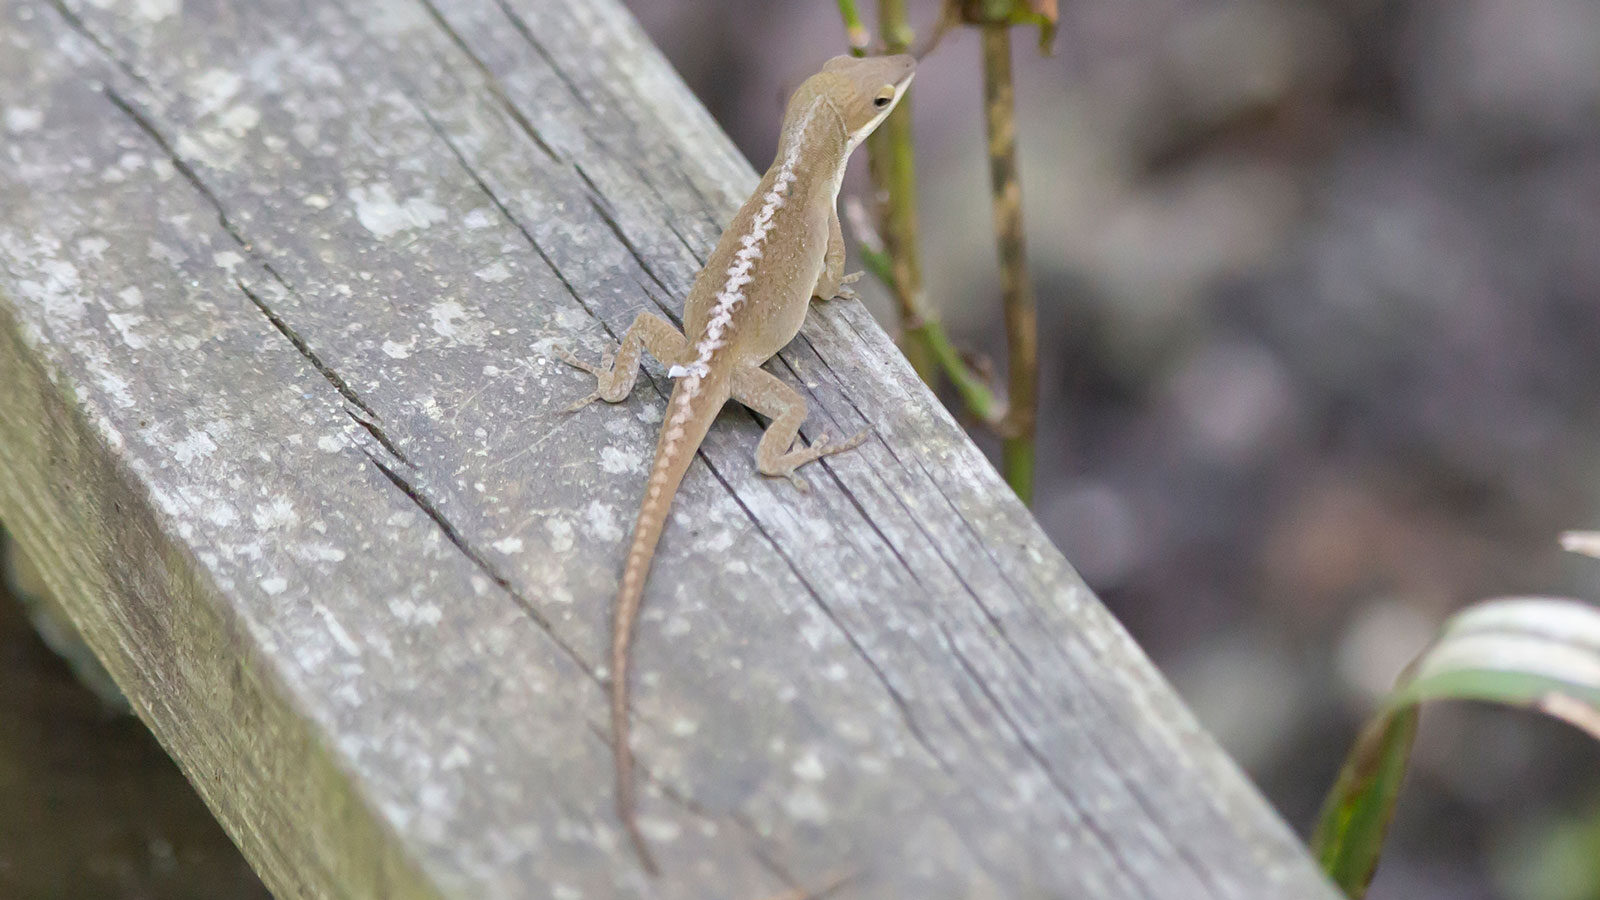 Green anole in a brown phase crawling on a wooden rail